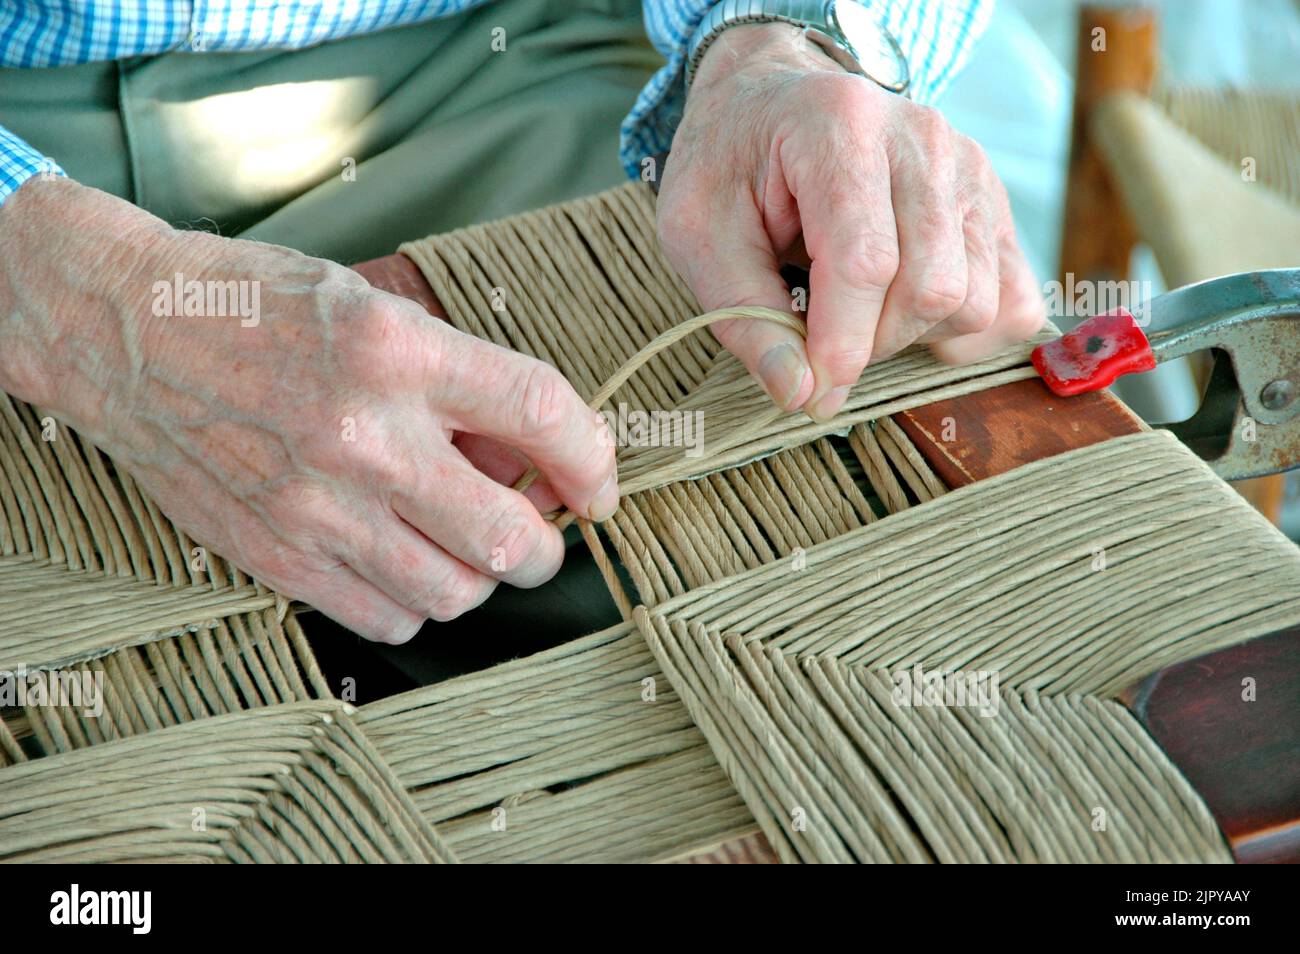 Hands working at an arts and crafts show making crafts and art weaving for sale Stock Photo